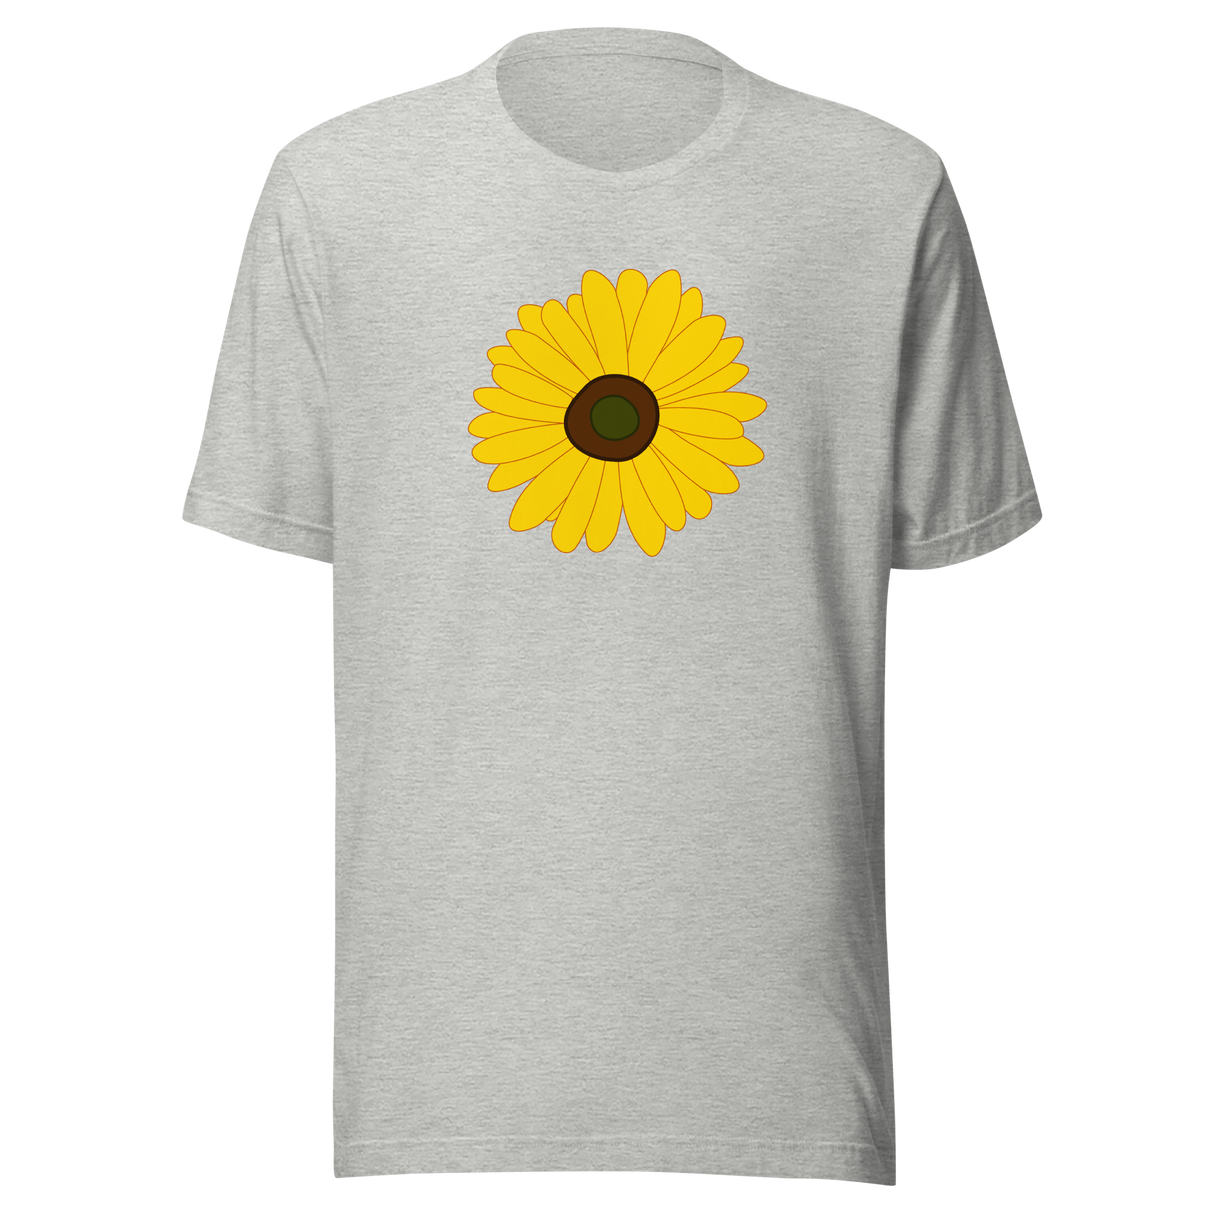 yellow-sunflower-sunflower-tee-yellow-t-shirt-flower-tee-floral-t-shirt-ladies-tee#color_athletic-heather